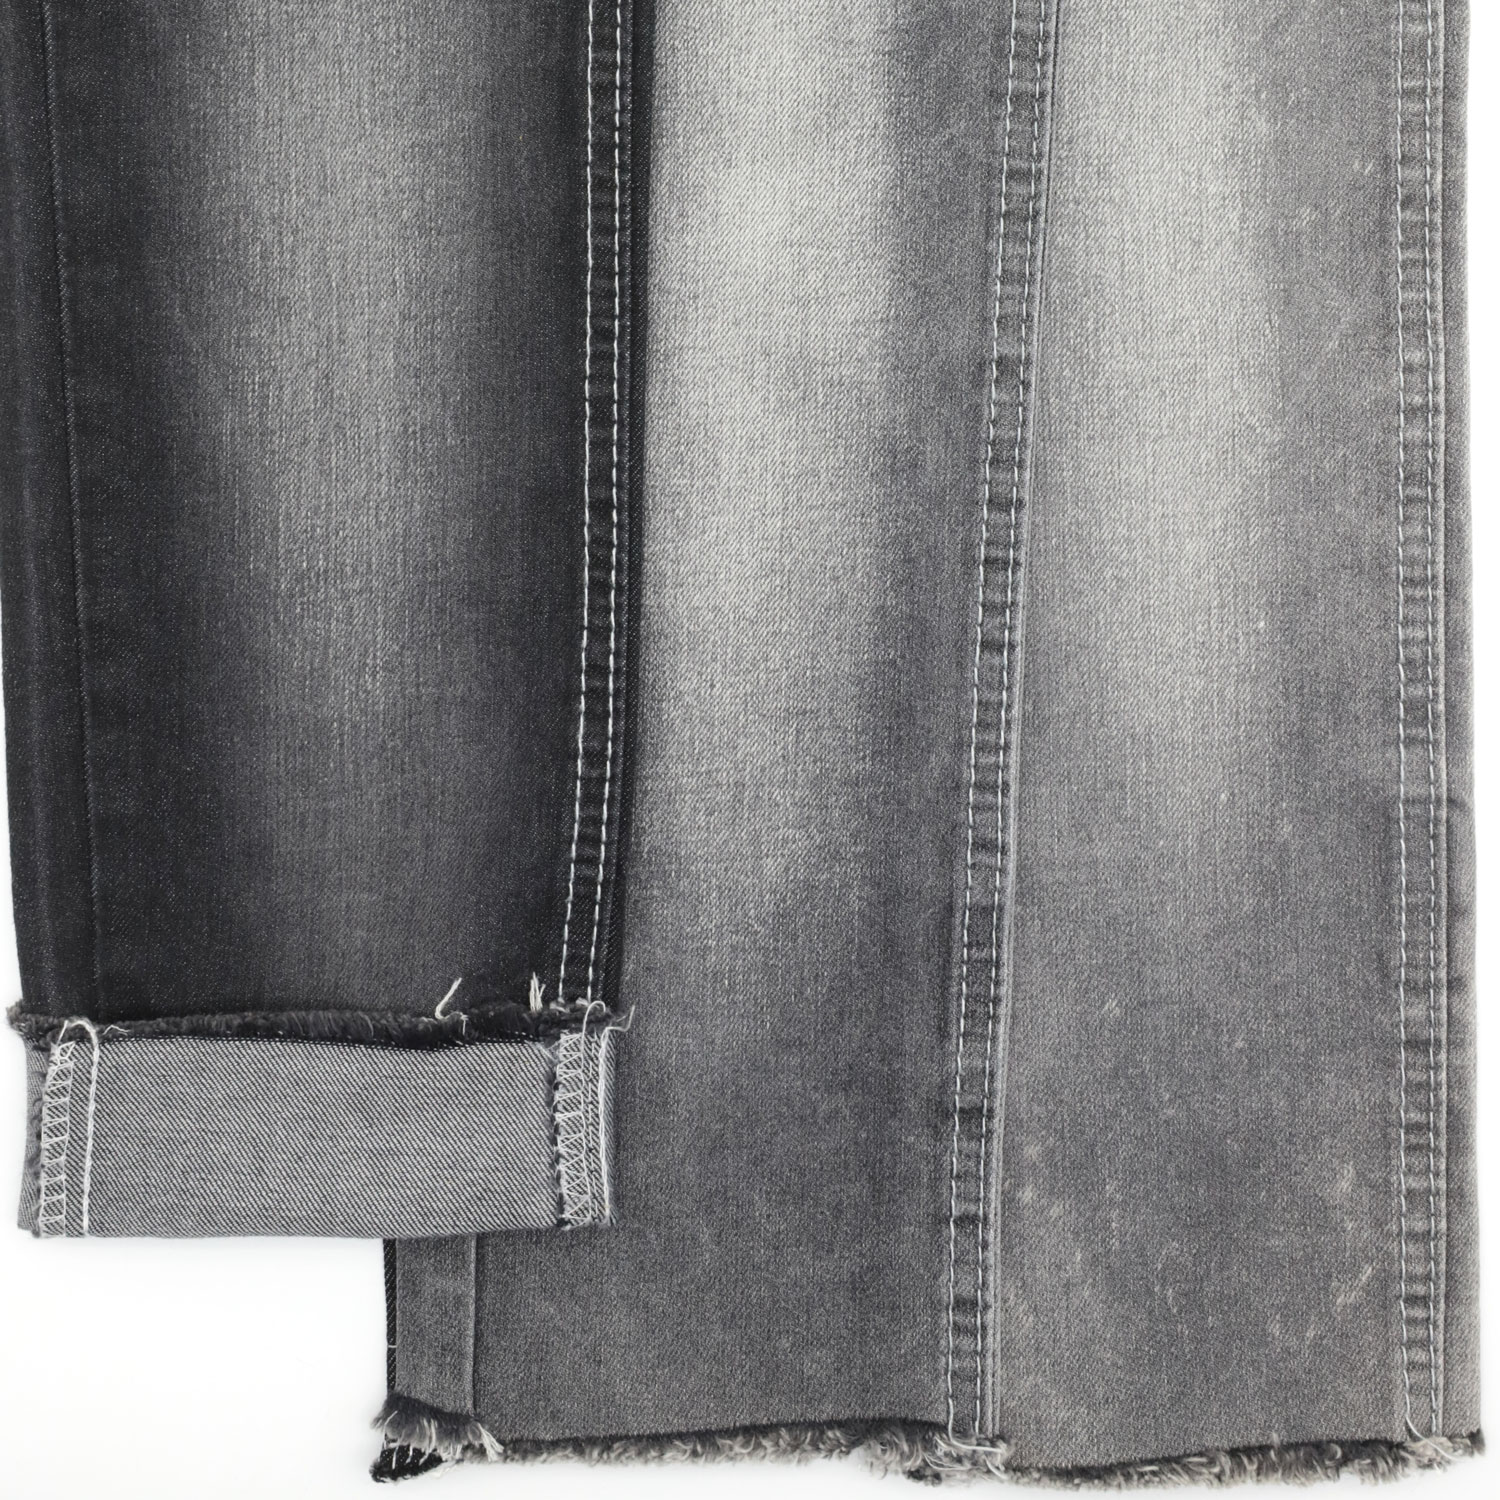 The Best Raw Denim Jeans - Entry Level 1